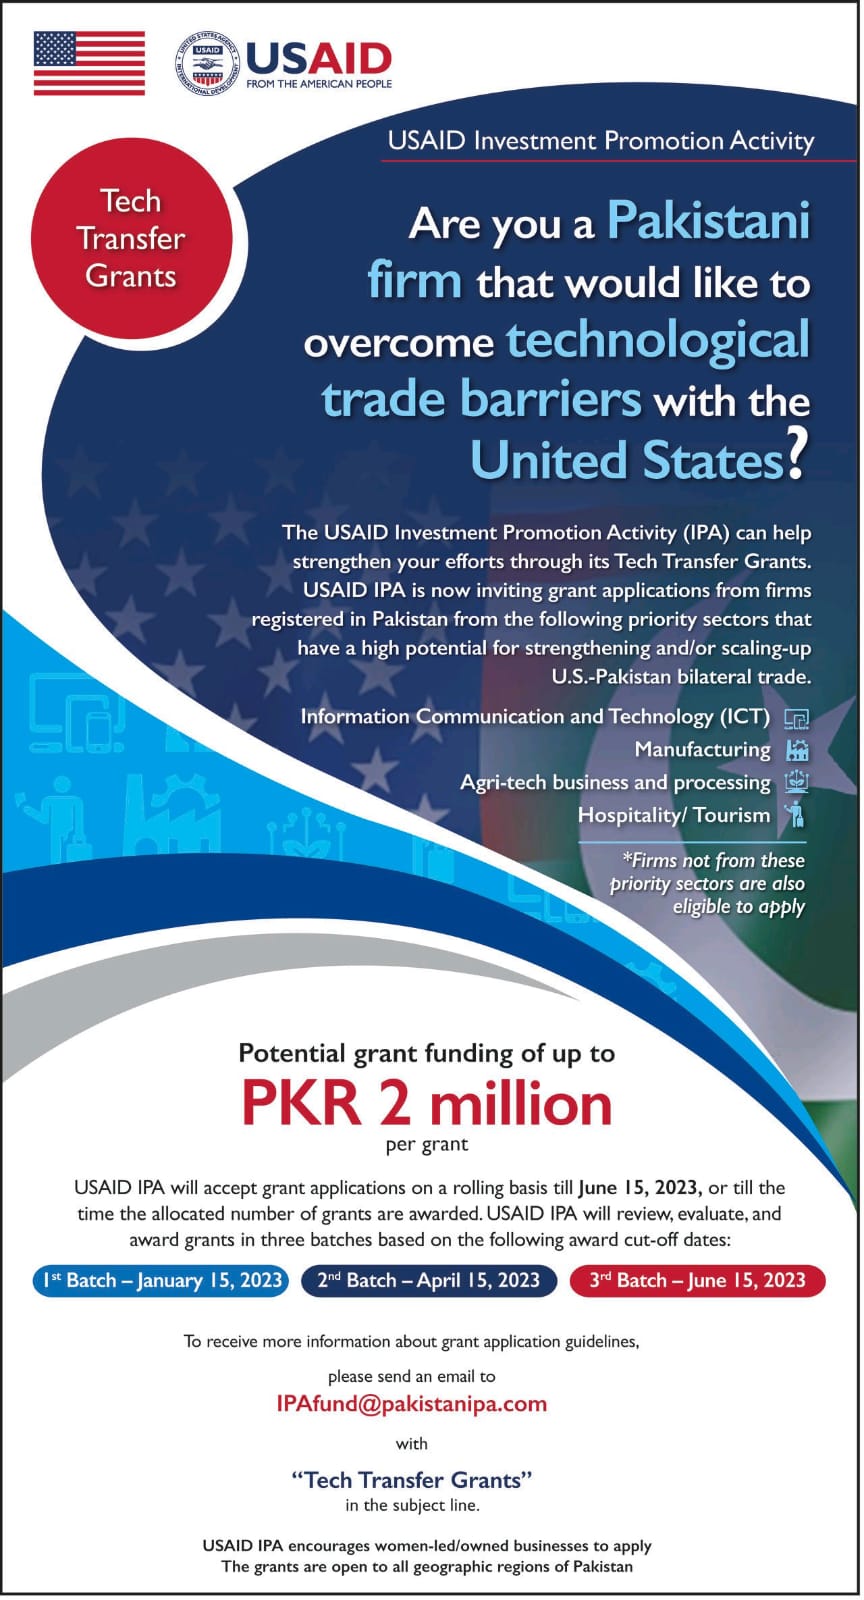 USAID Investment Promotion Activity (IPA) - Technology Transfer Grants